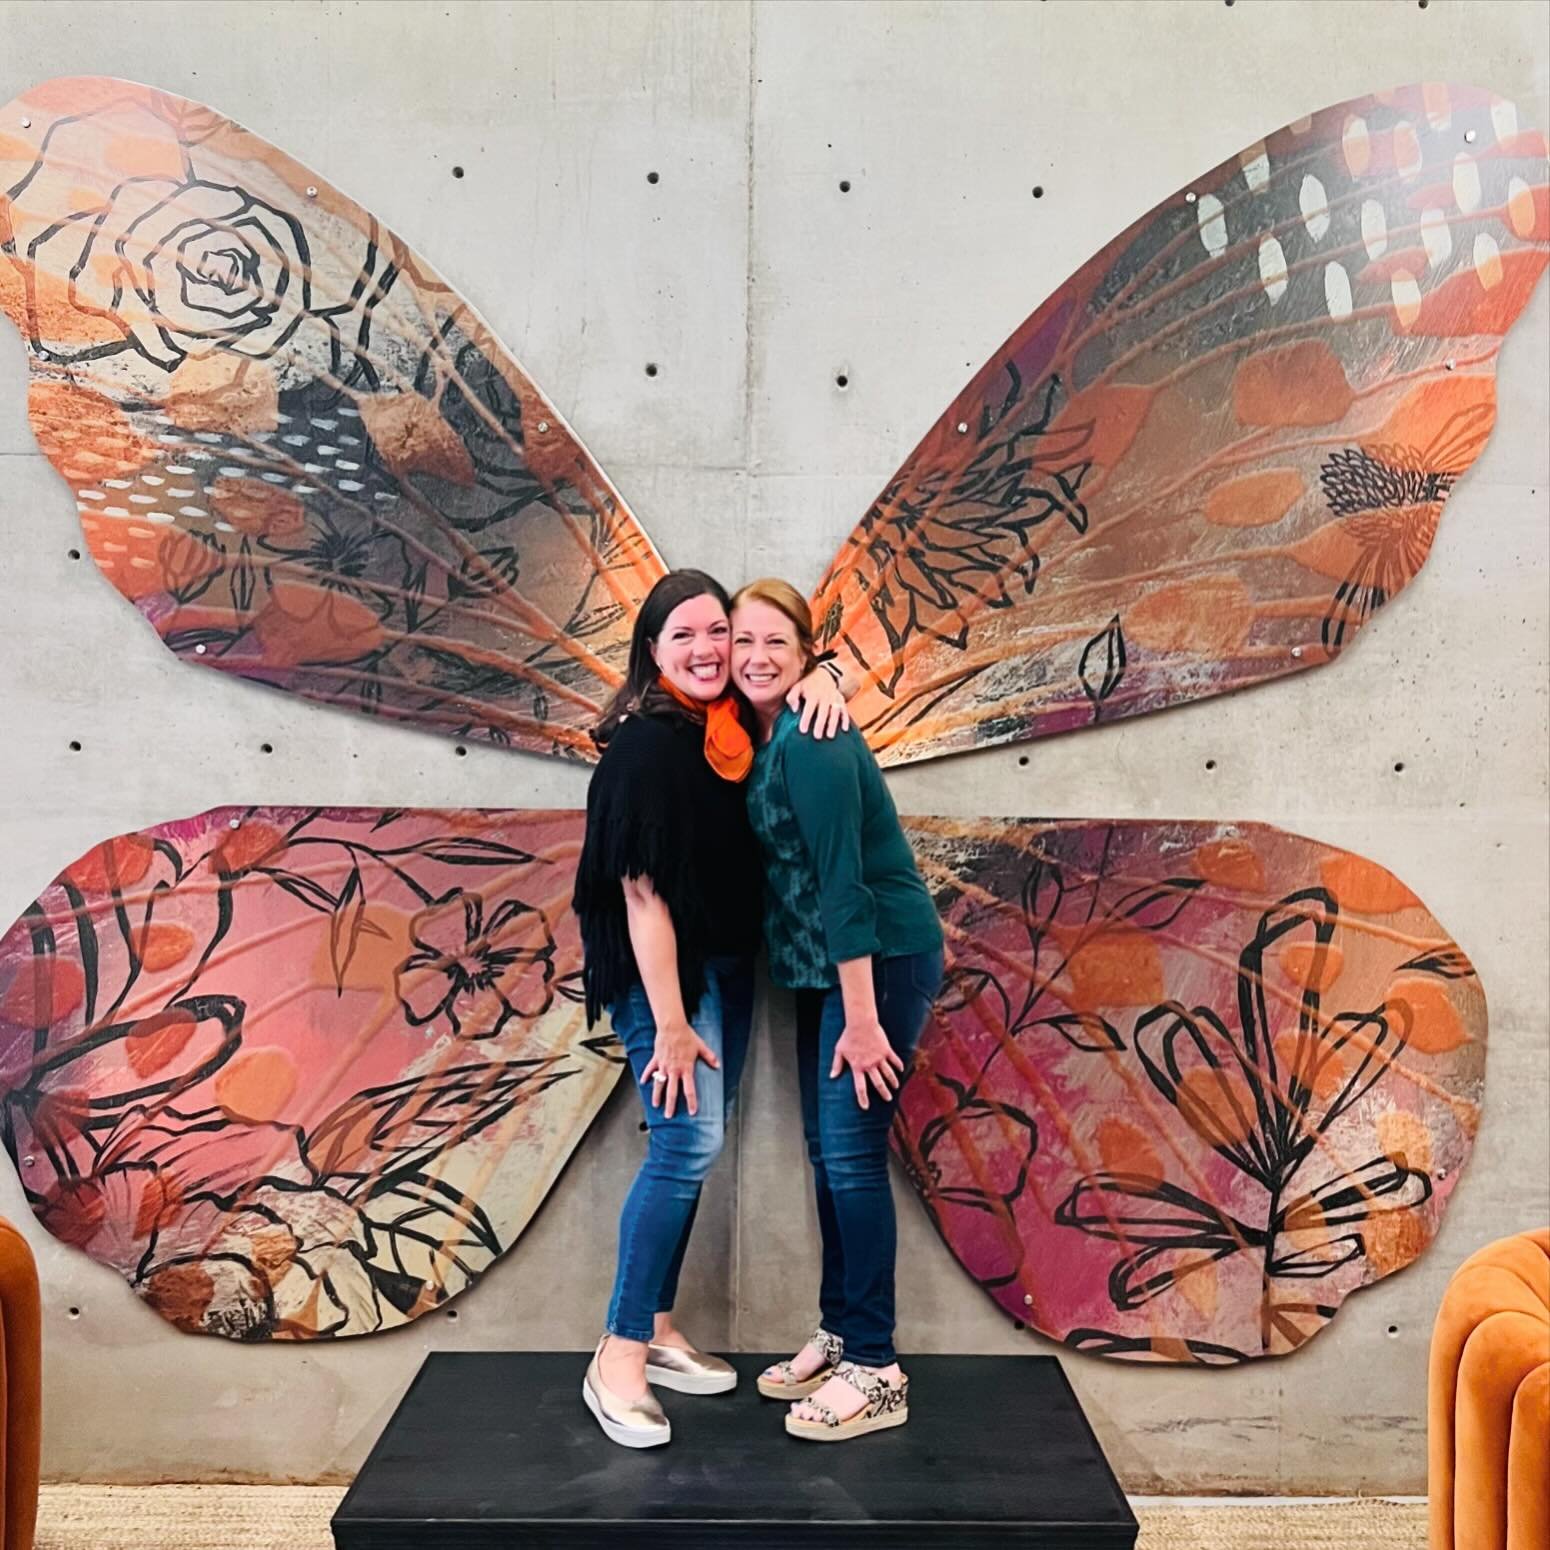 Flying into Friday and birthday weekend for my favorite red head @lesliehphotog 🎉 It&rsquo;s a great weekend to visit my #transformedclt 🦋 installation @theline_clt in and soak up all the fun in @southendclt ☀️